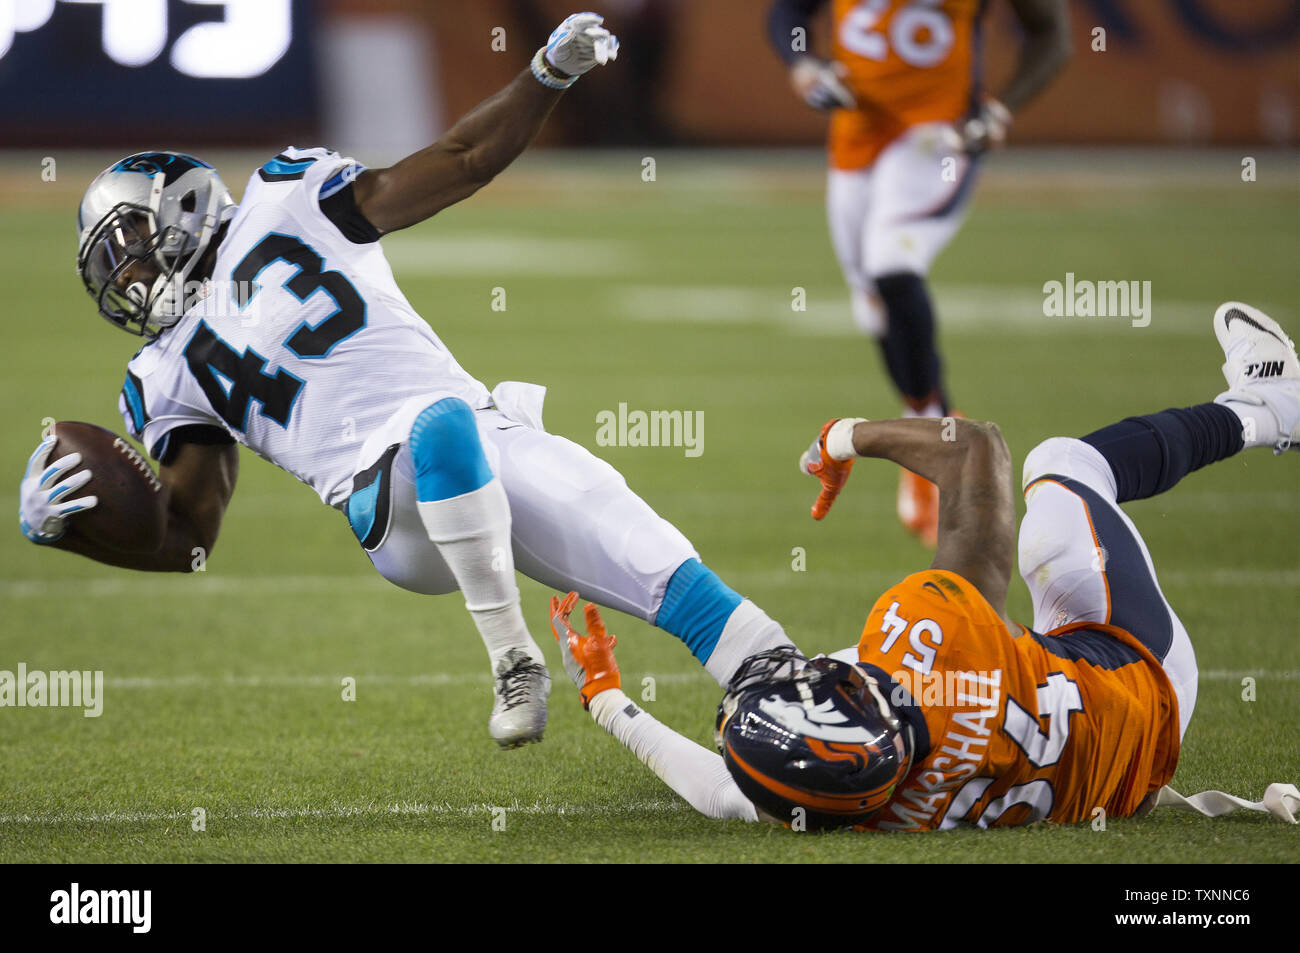 Carolina Panthers running back Fozzy Whittaker (43) gains four yards on a pass reception against Denver Broncos linebacker Brandon Marshall in the second quarter at the NFL's season opener and Super Bowl 50 rematch at Sports Authority Field at Mile High in Denver on September 8, 2016.  Newton is the NFL 2015 MVP.   Photo by Gary C. Caskey/UPI Stock Photo